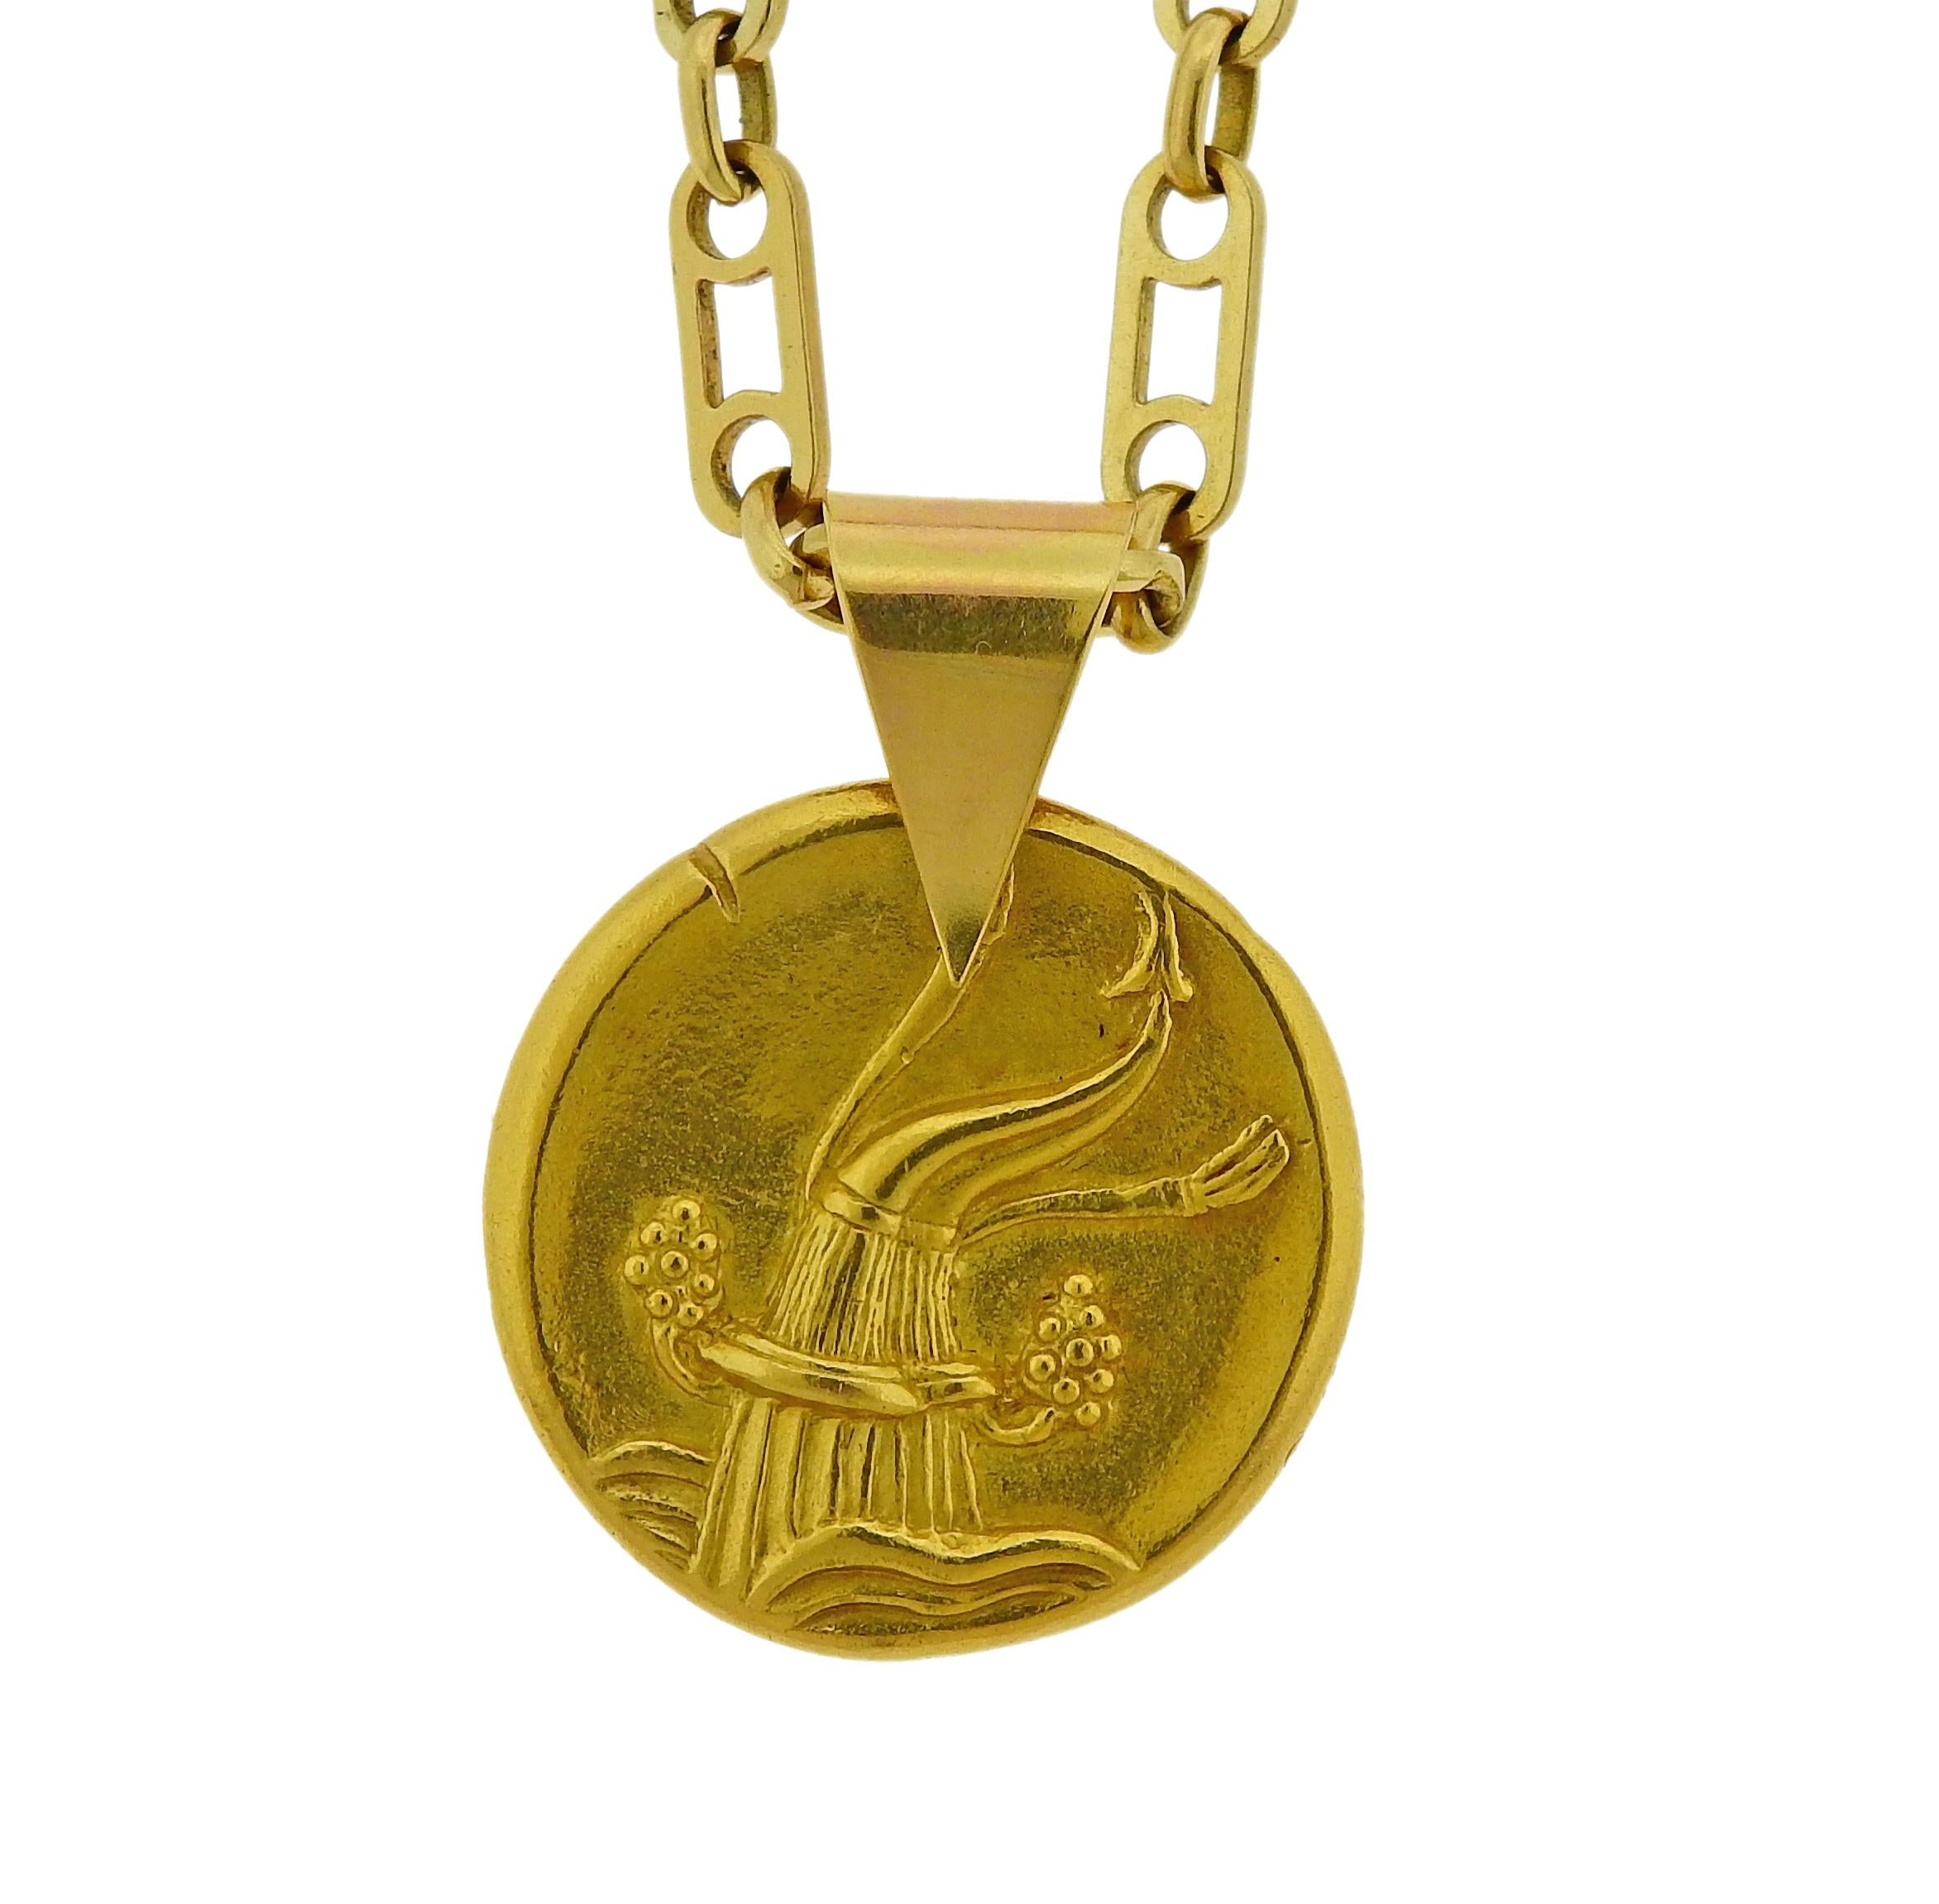 Vintage circa 1970s 18k gold pendant and necklace by Van Cleef & Arpels, depicting Aquarius zodiac sign. Pendant is 26mm in diameter x 35mm long with bale (bale opens), Necklace is 24